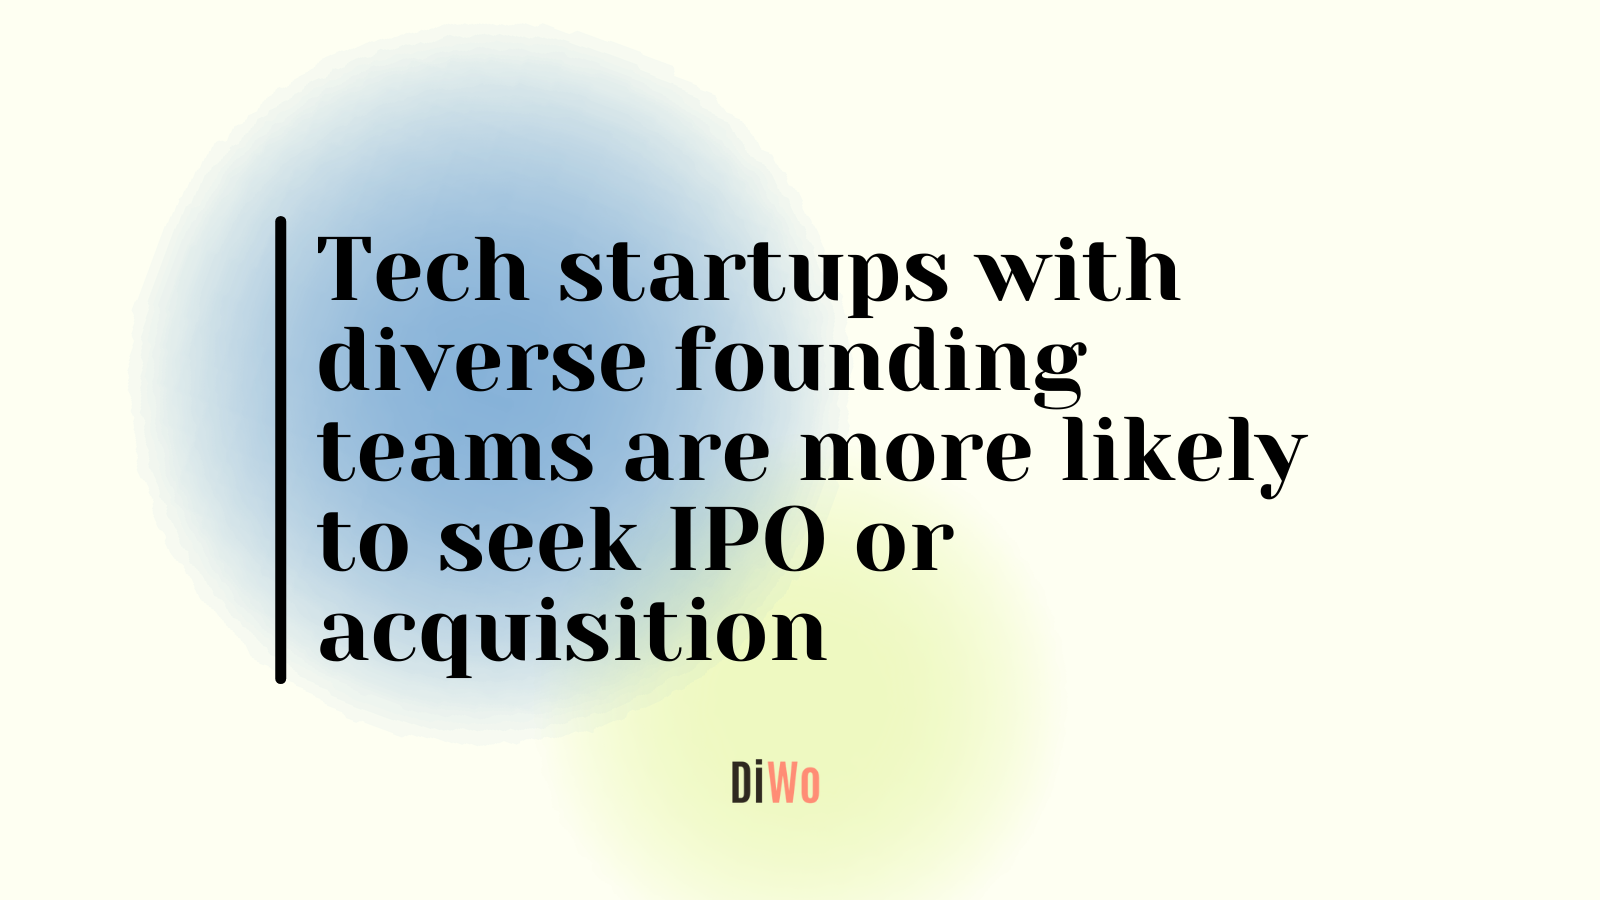 Featured image for “Tech startups with diverse founding teams are more likely to seek IPO or acquisition”